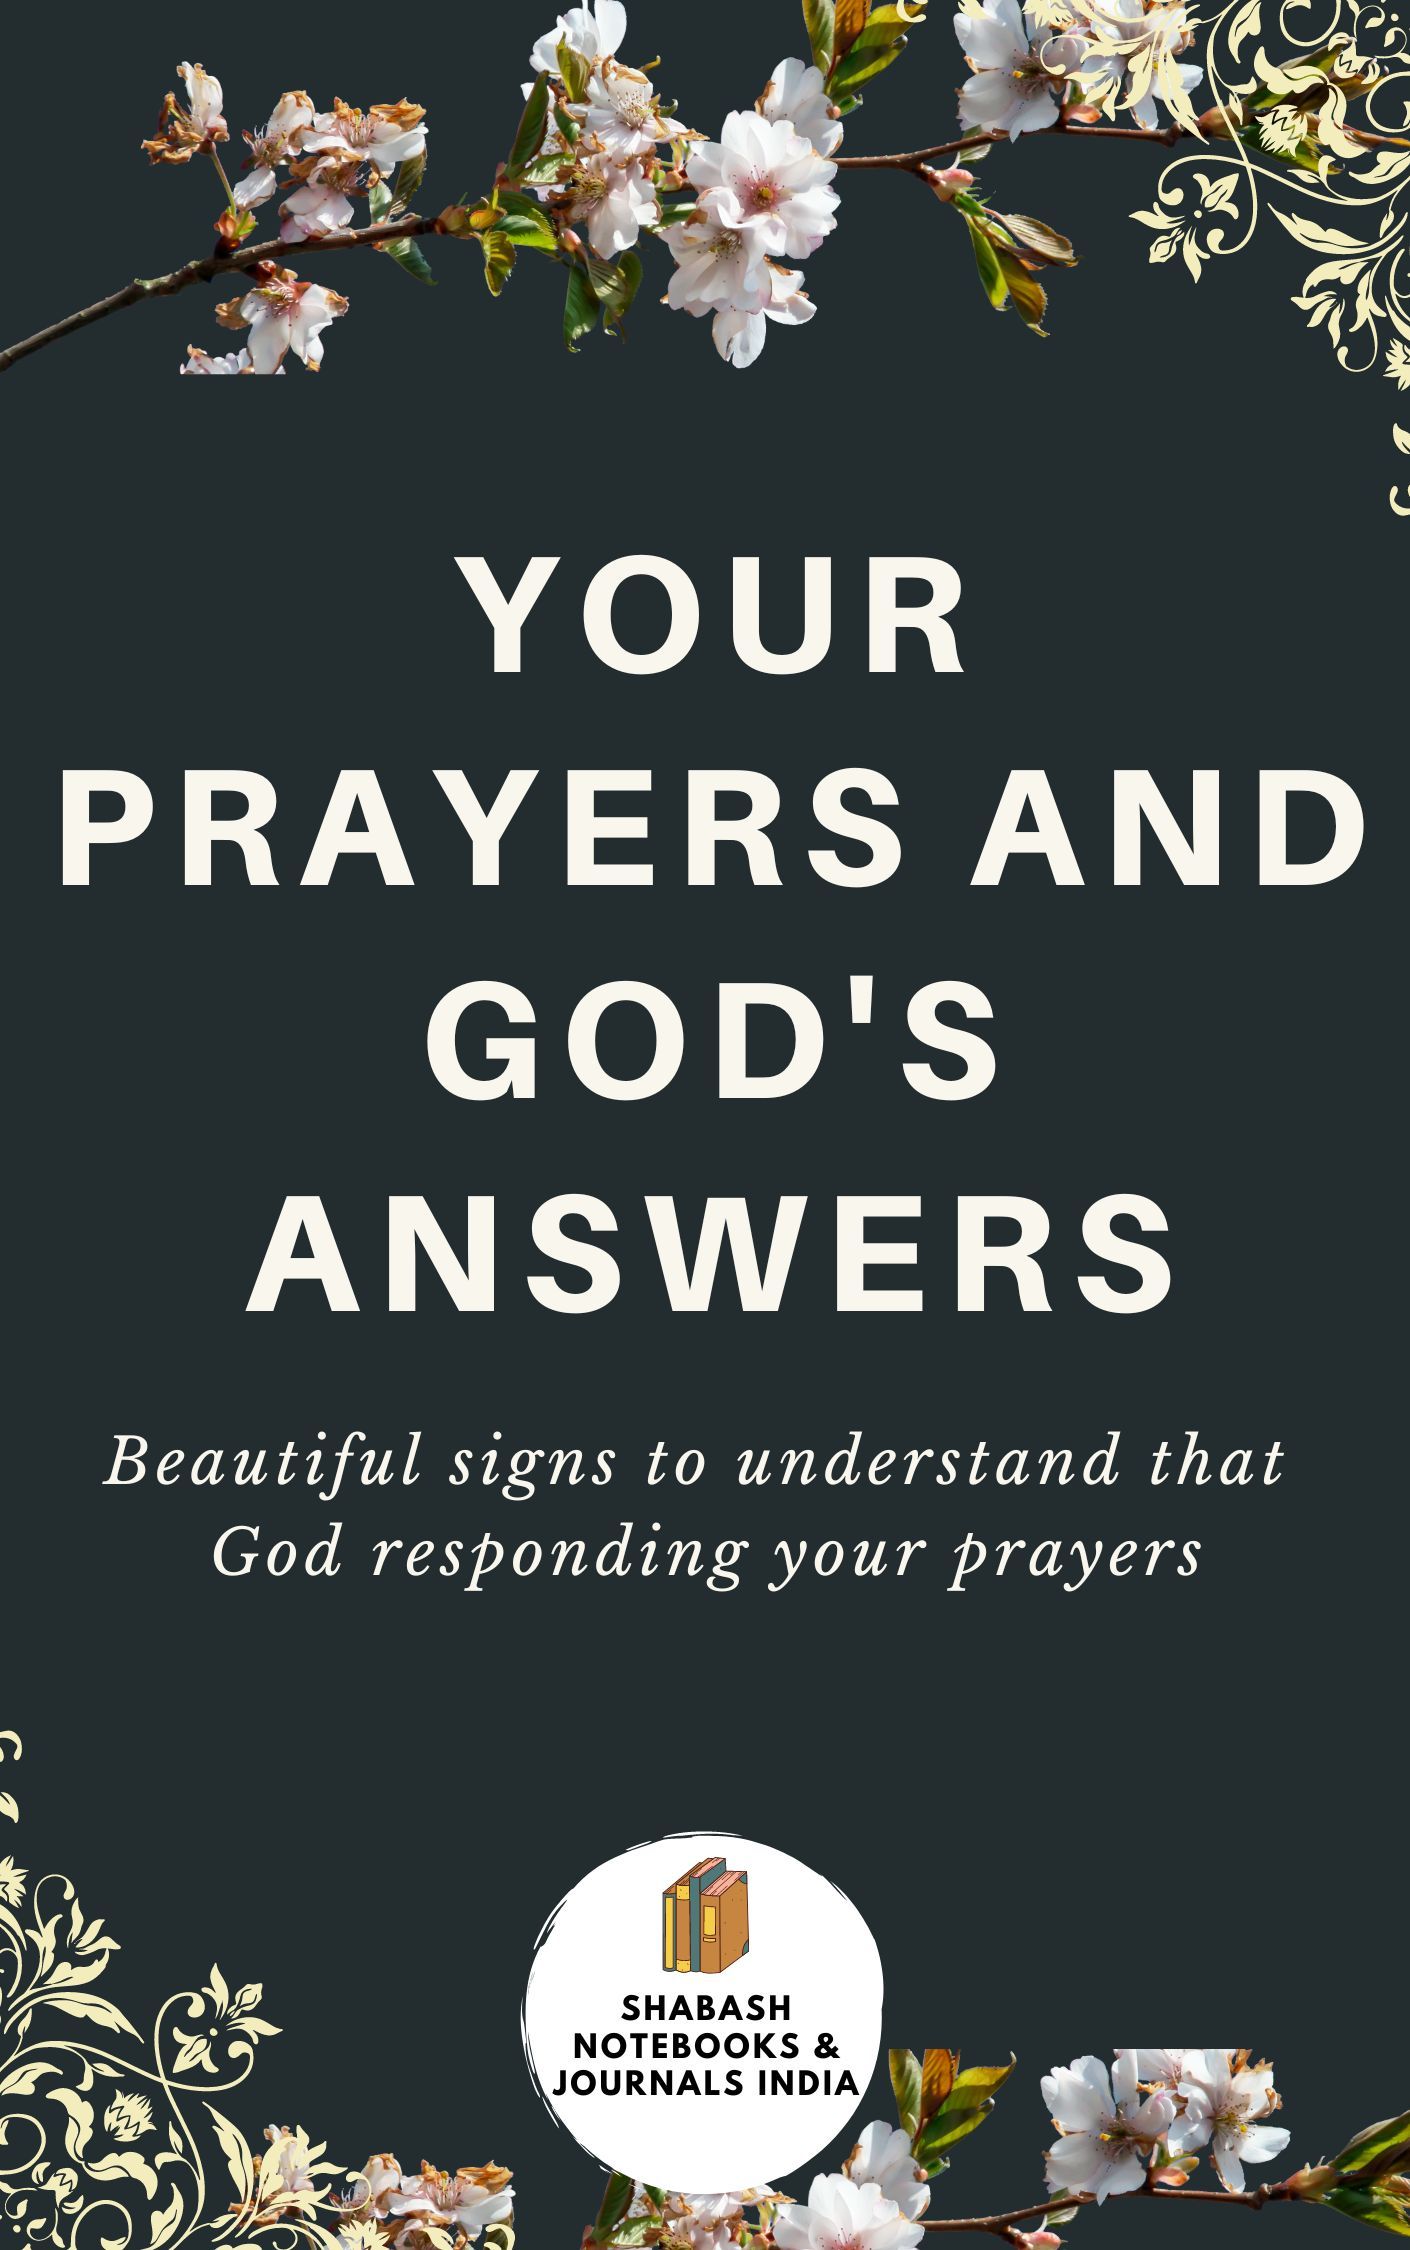 Your Prayers and God's Answers's Book Image